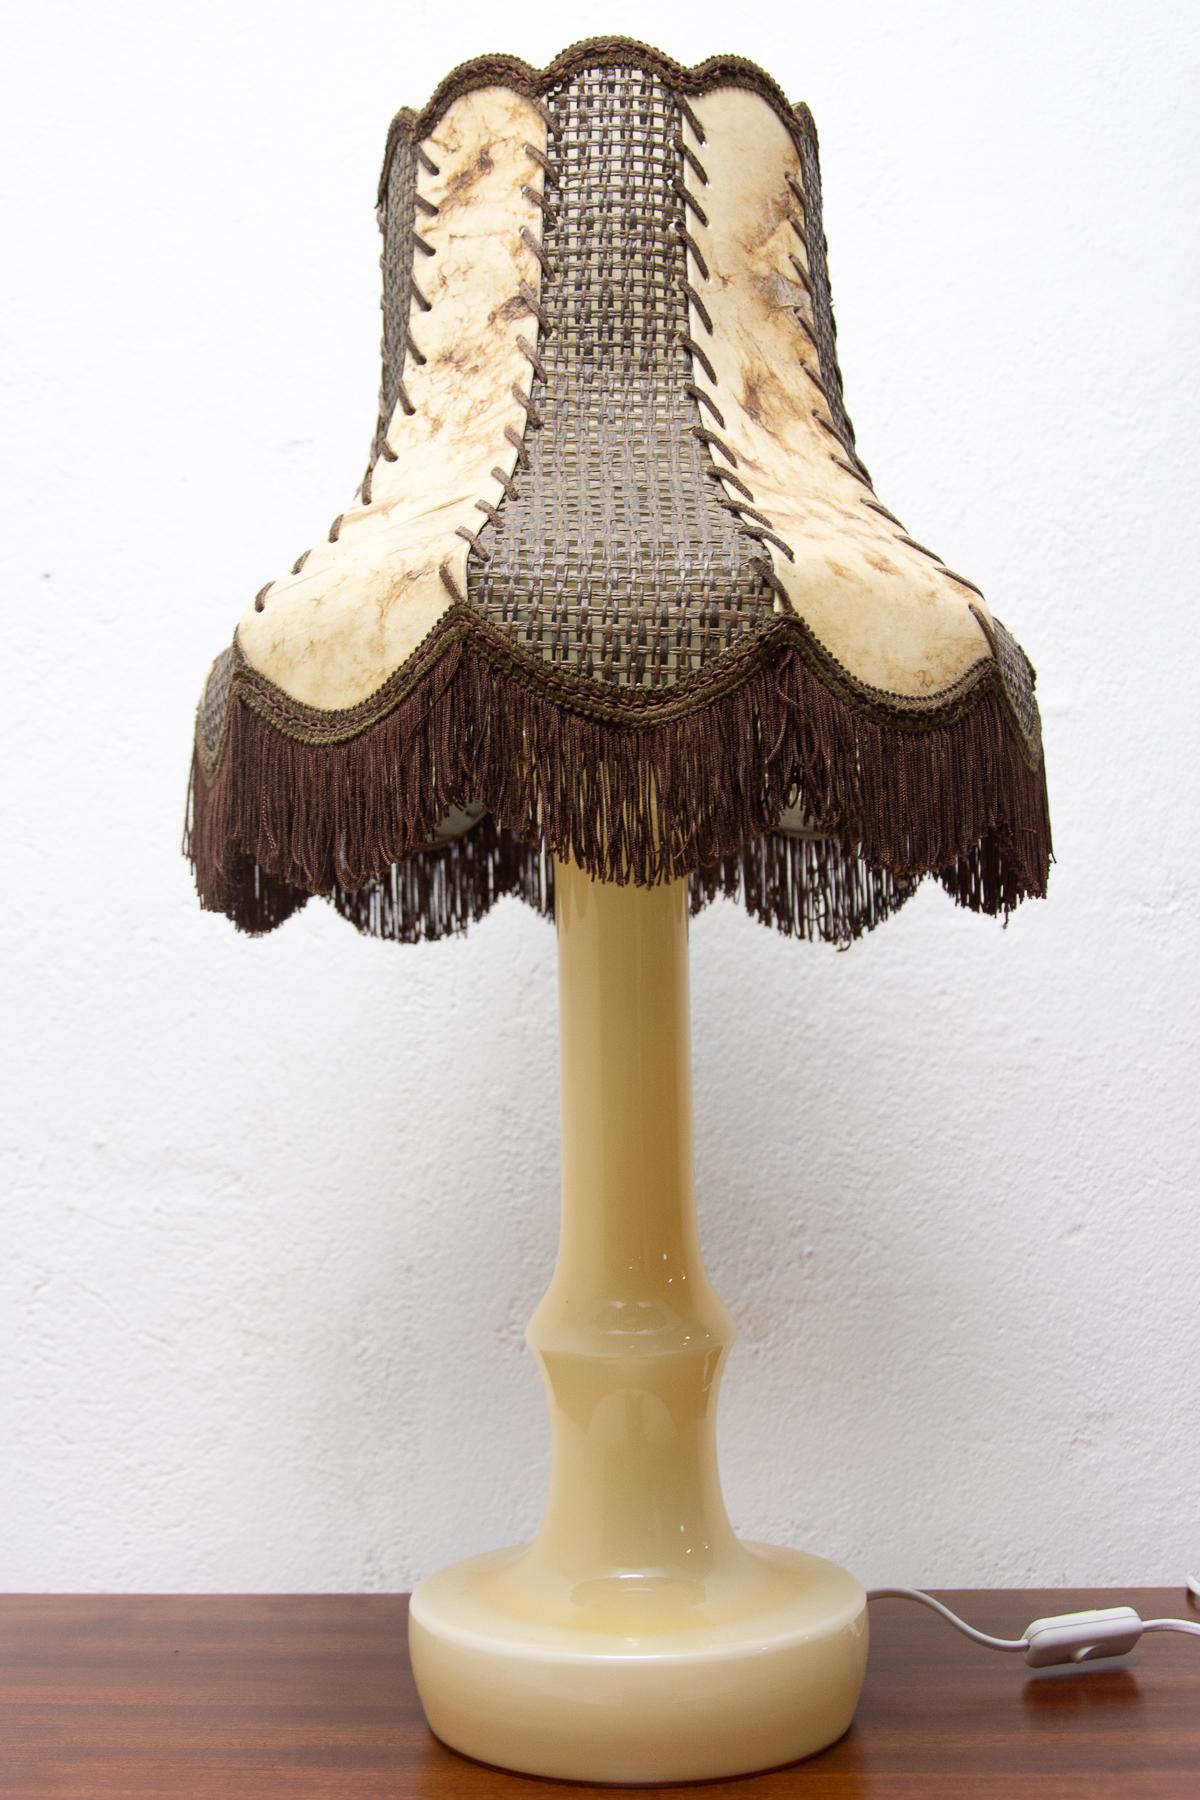 Prw-war table lamp in the shape of a mushroom.
It was made in the former Czechoslovakia in the 1930´s.
Overall, it is in very good condition, fully functional, one E27 bulb, up to 250 V.

Measures: Height: 77 cm

Width: 48 cm

Depth: 48